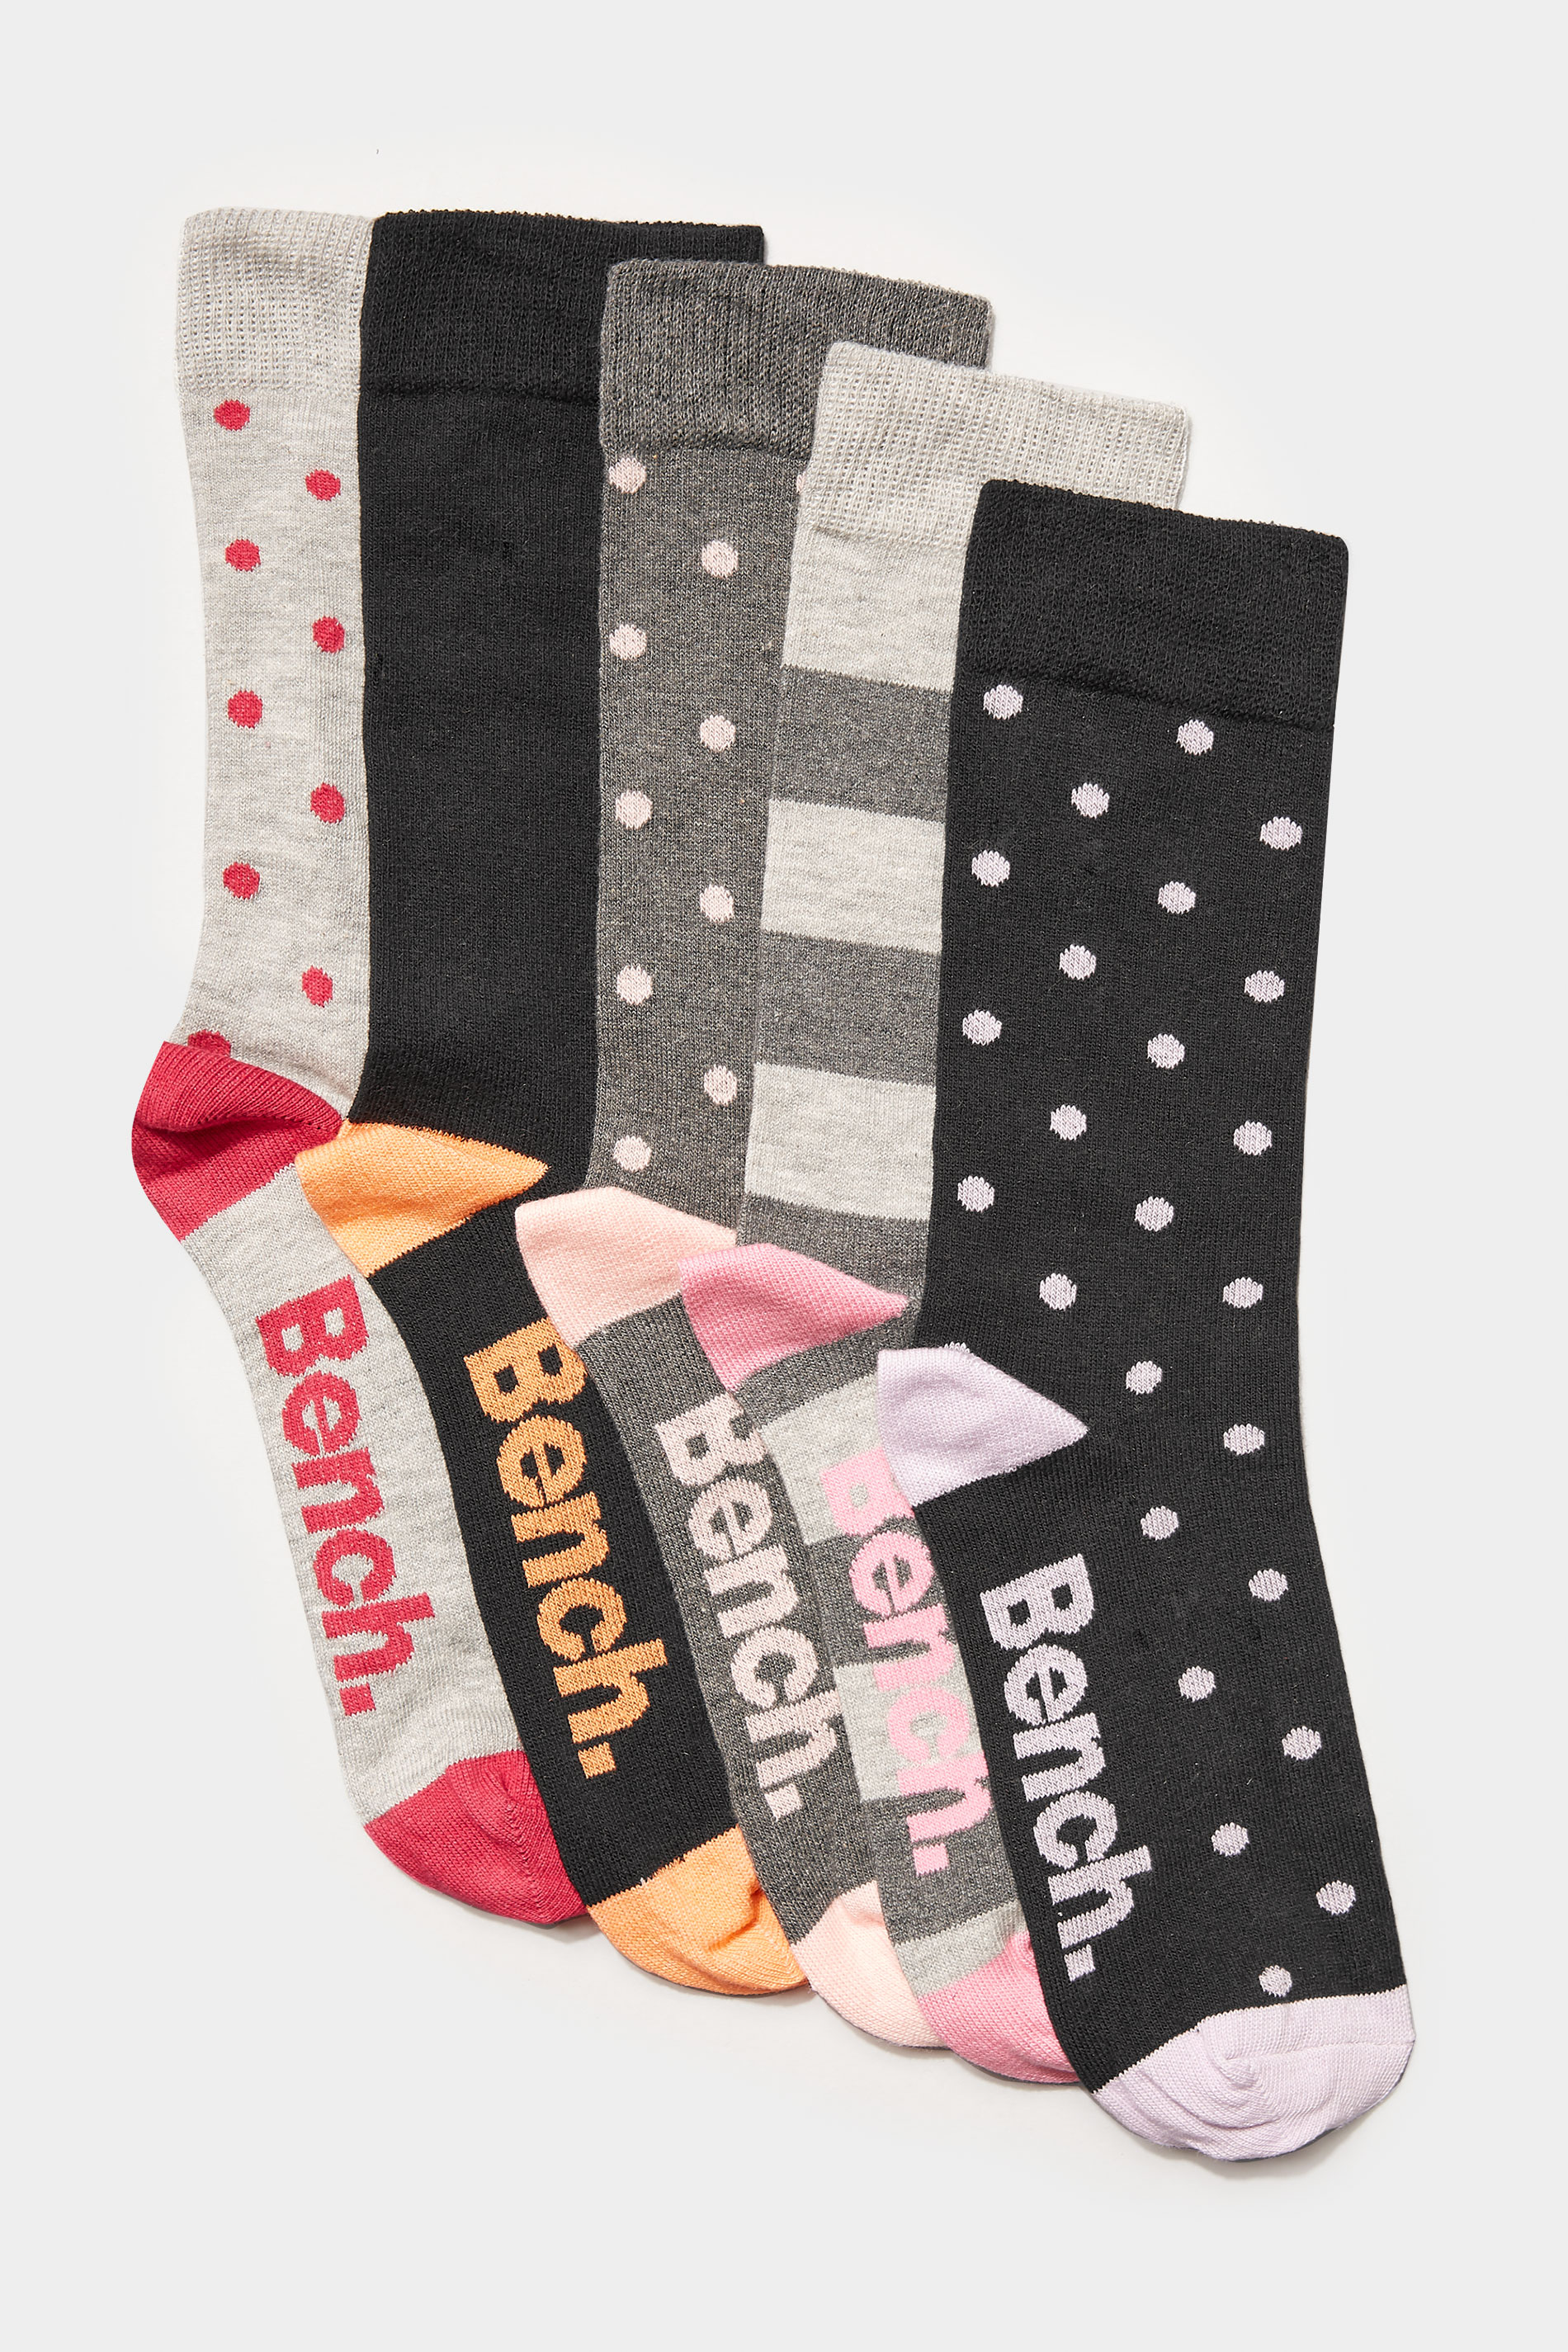 Bench 5 Pack Multi Patterned Crew Socks Long Tall Sally 